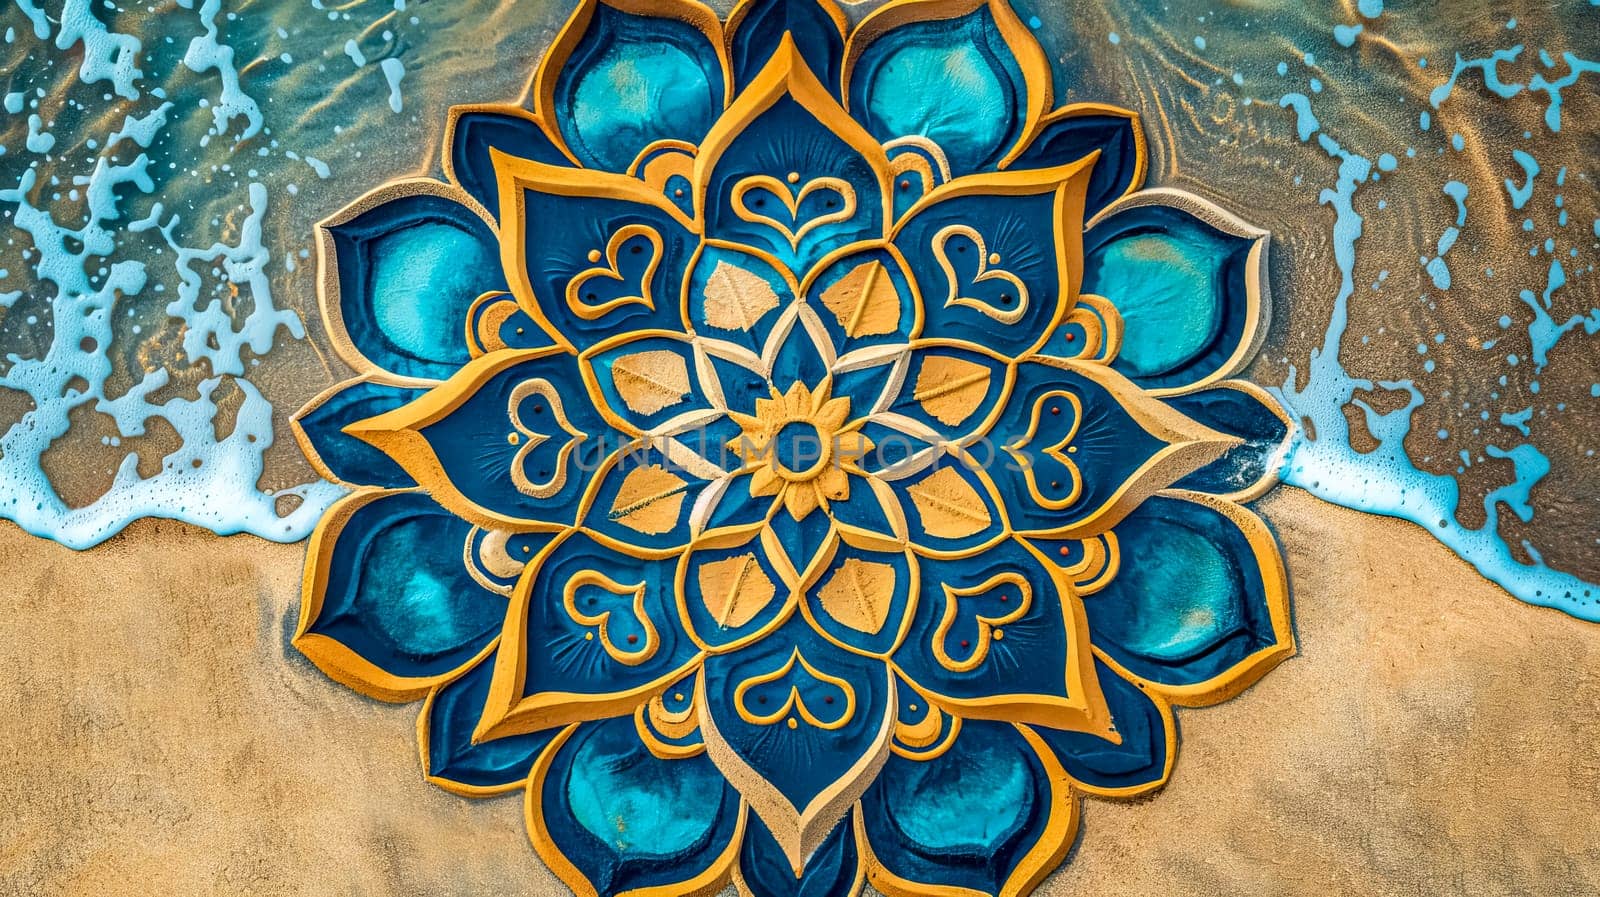 Vibrant, handcrafted mandala design in blue and gold lying on sandy shore with gentle sea foam